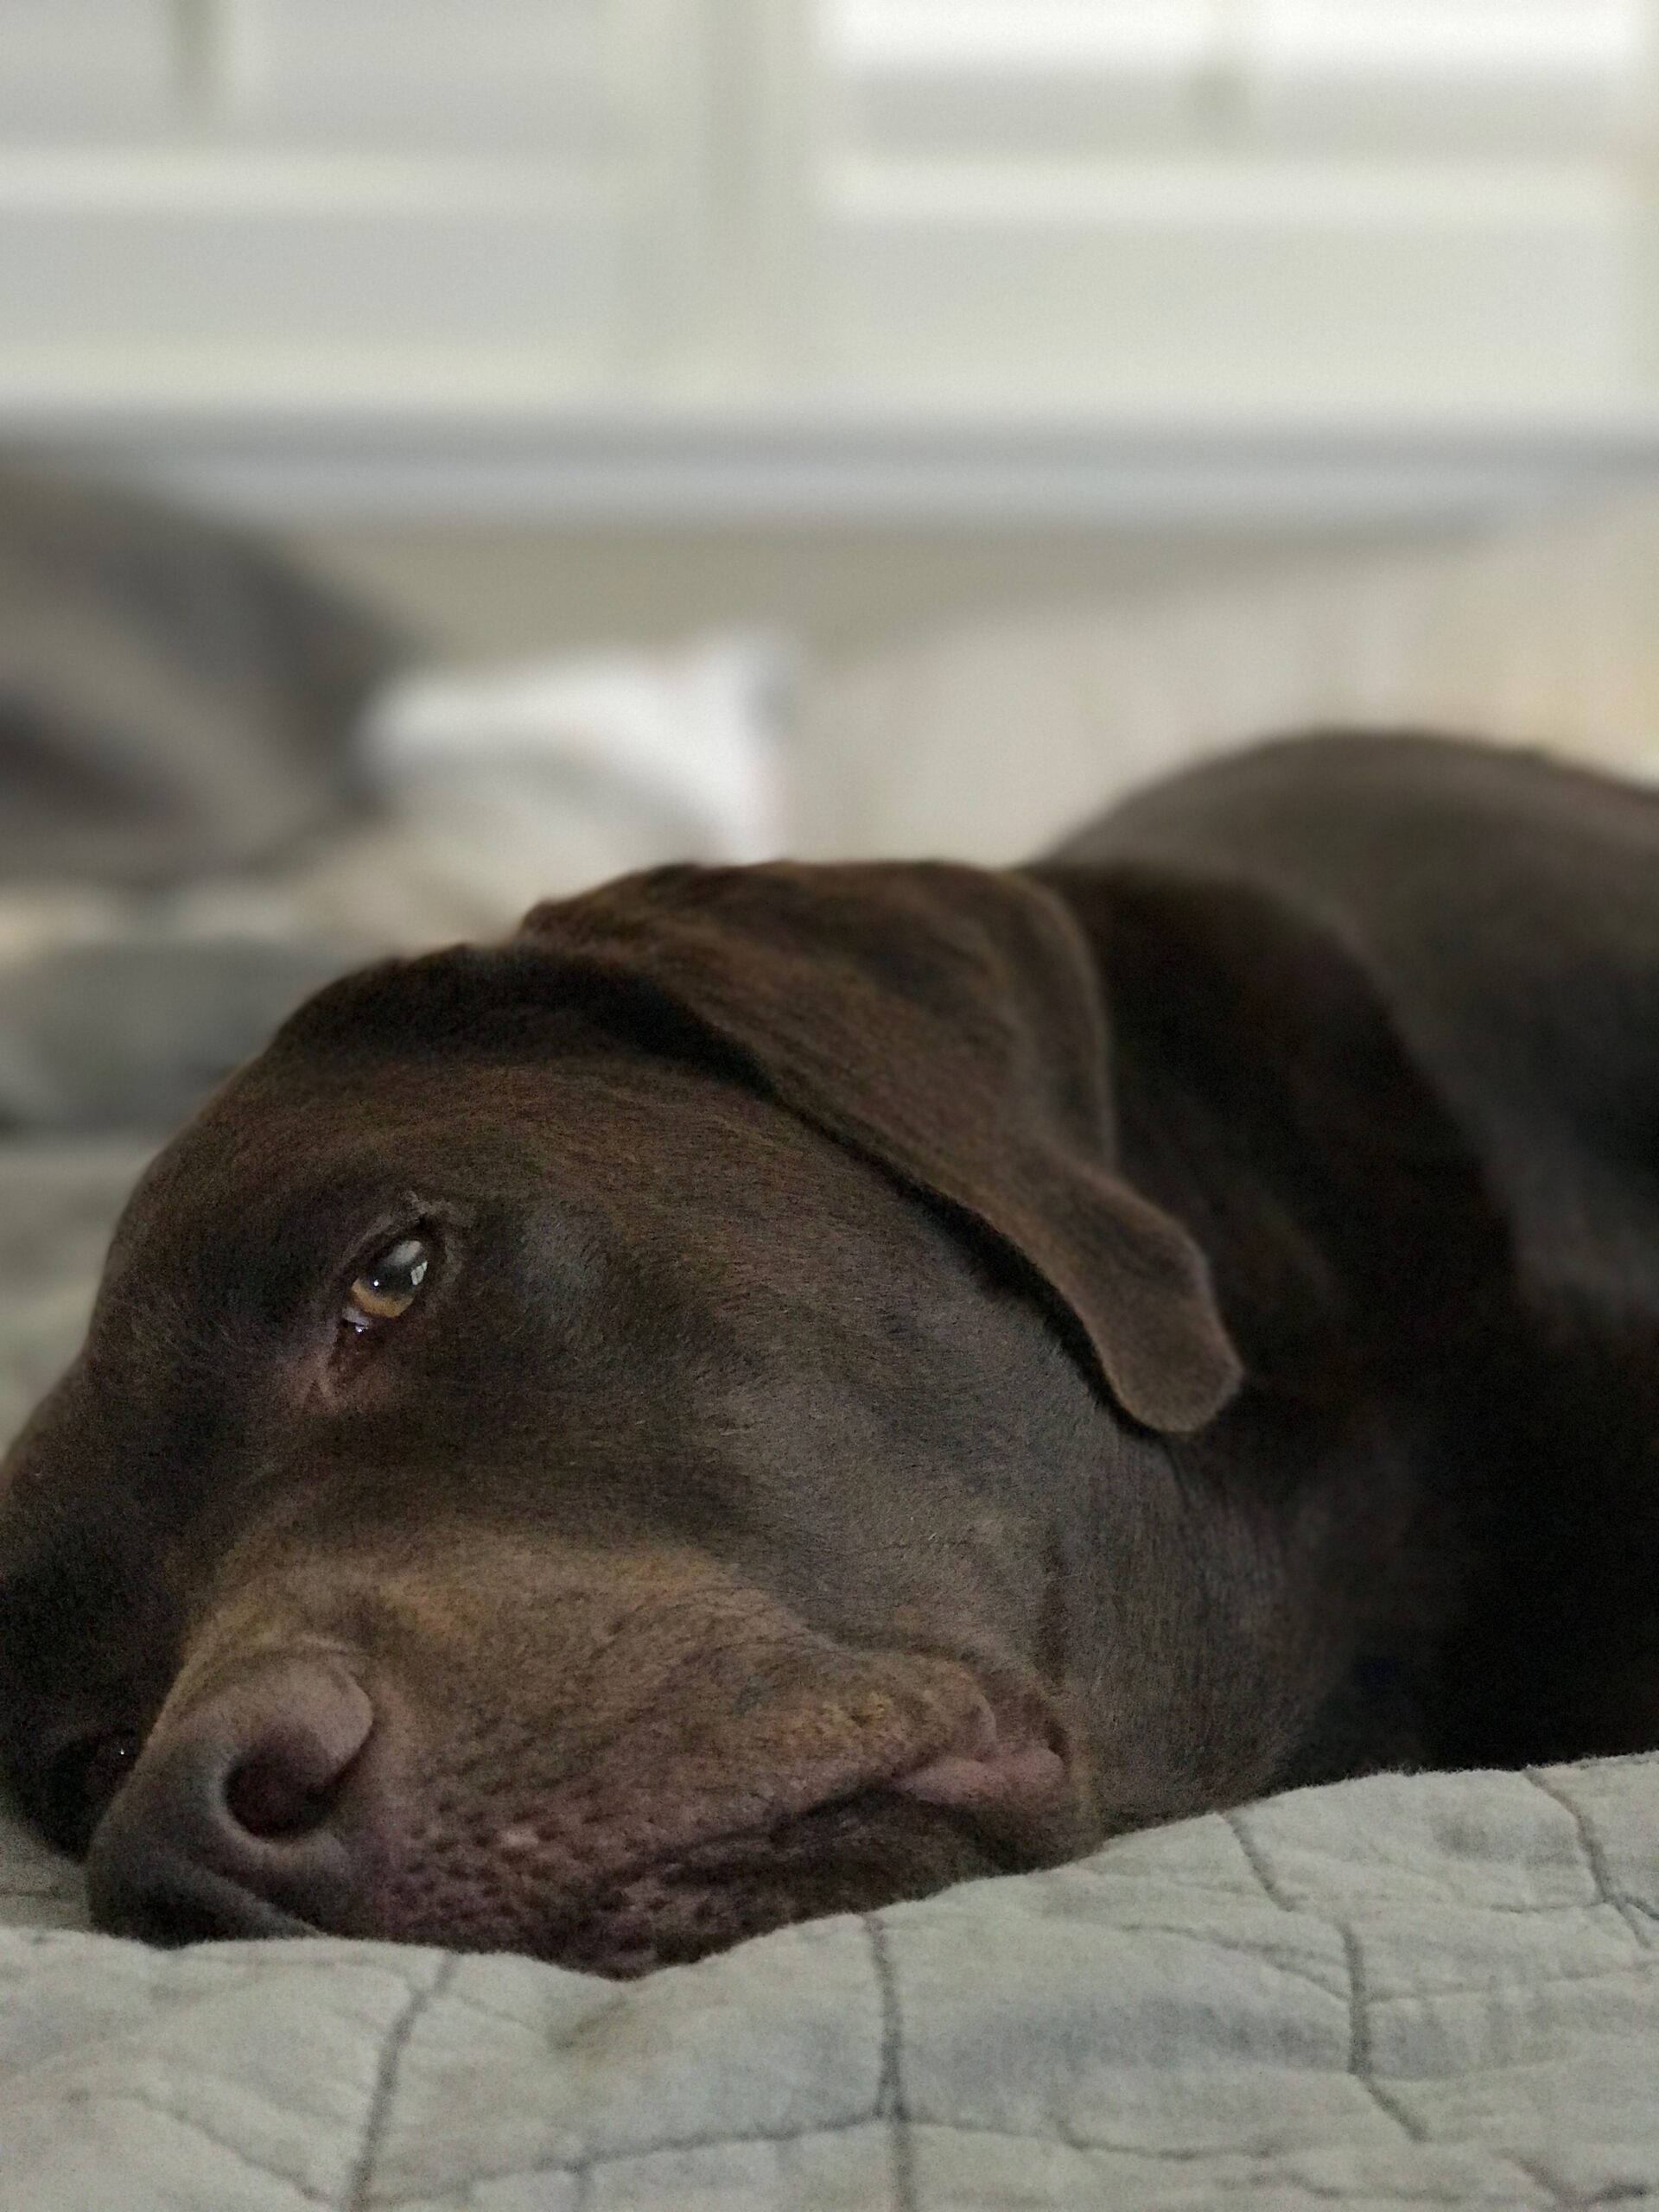 Photos Of Our Chocolate Labs That Make Me Laugh - What is better than funny dog photos? Here are some of my very favorites of our Chocolate Labradors! | Funny Dog Photos | Chocolate Labrador Retriever | Chocolate Lab Puppies